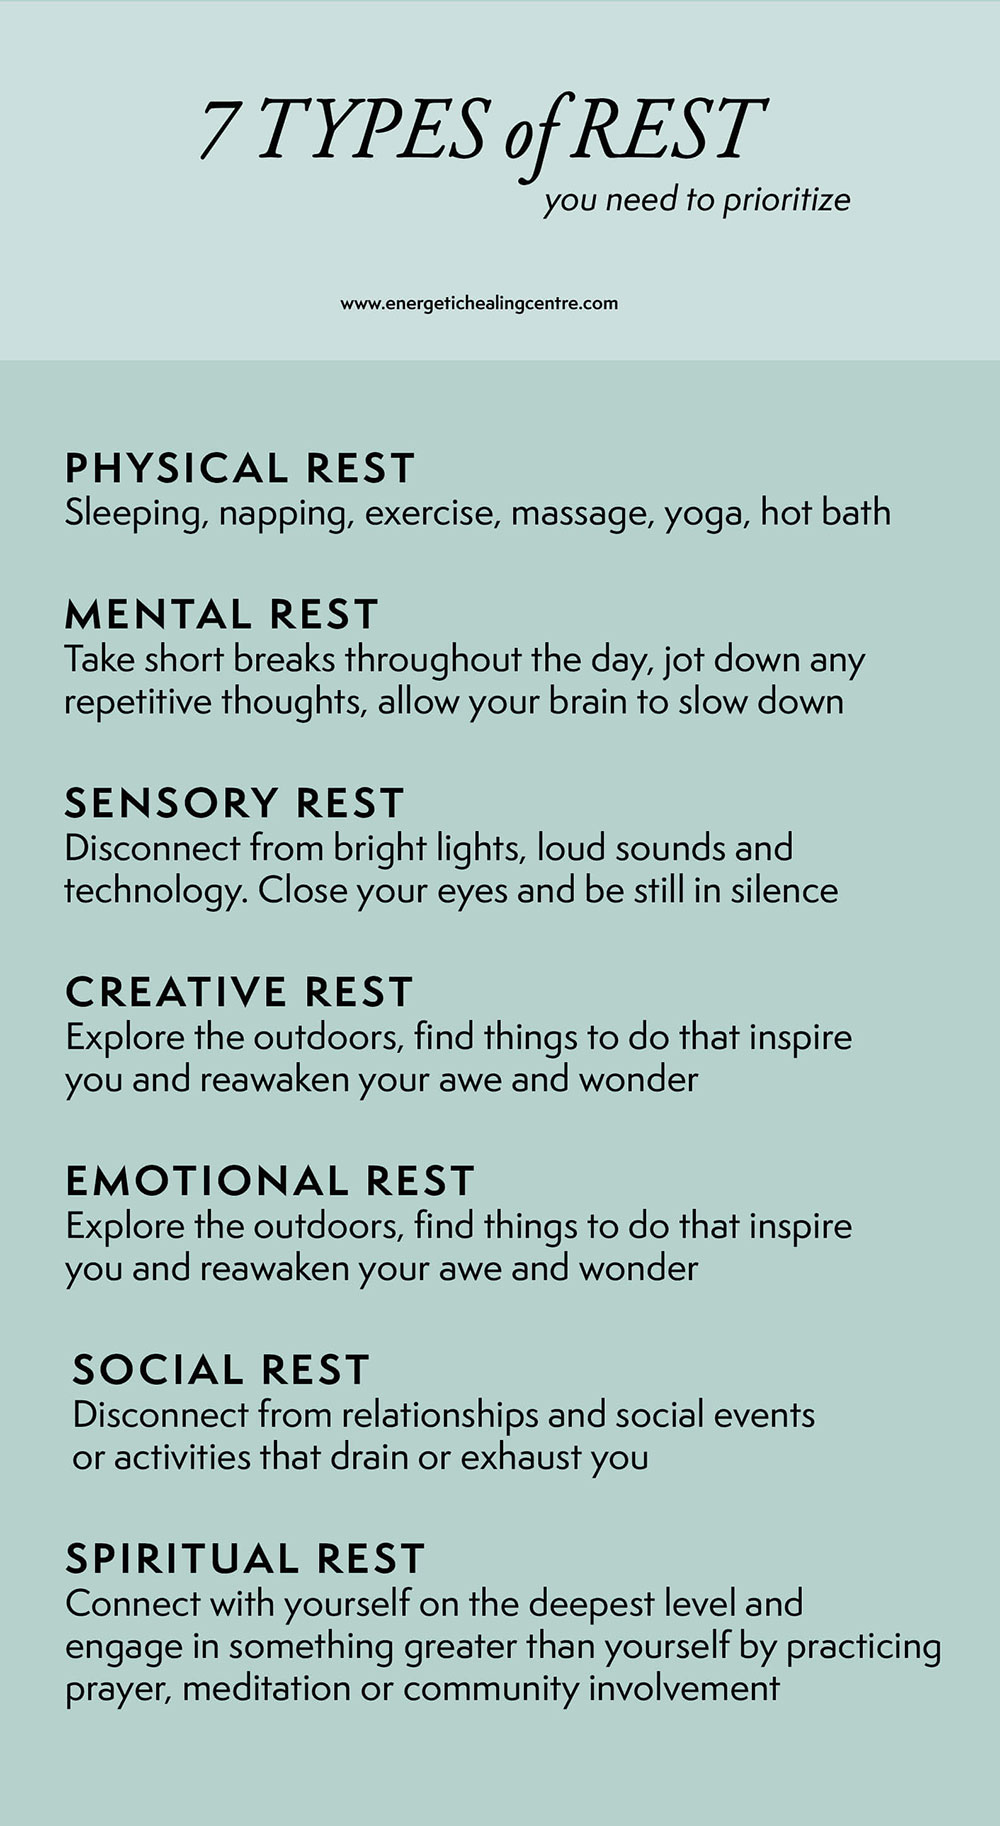 7 types of rest and relaxation you should prioritize